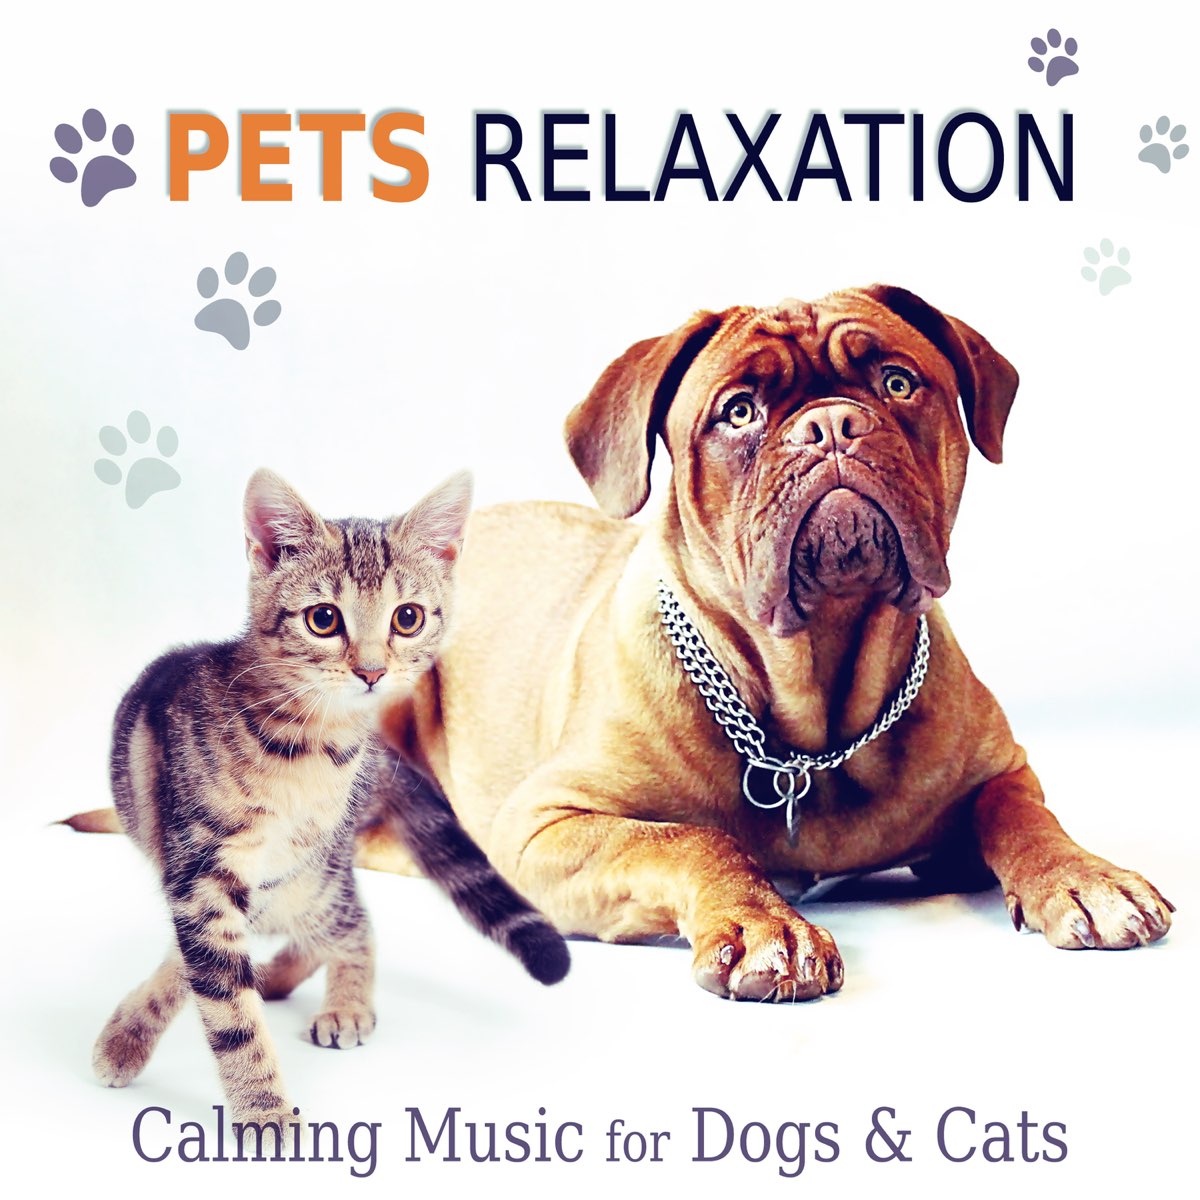 Pet Academy. Songs for Pets. Pets and Music Music for Cats and friends - Vol. 2. About Pets with Song. Music pets